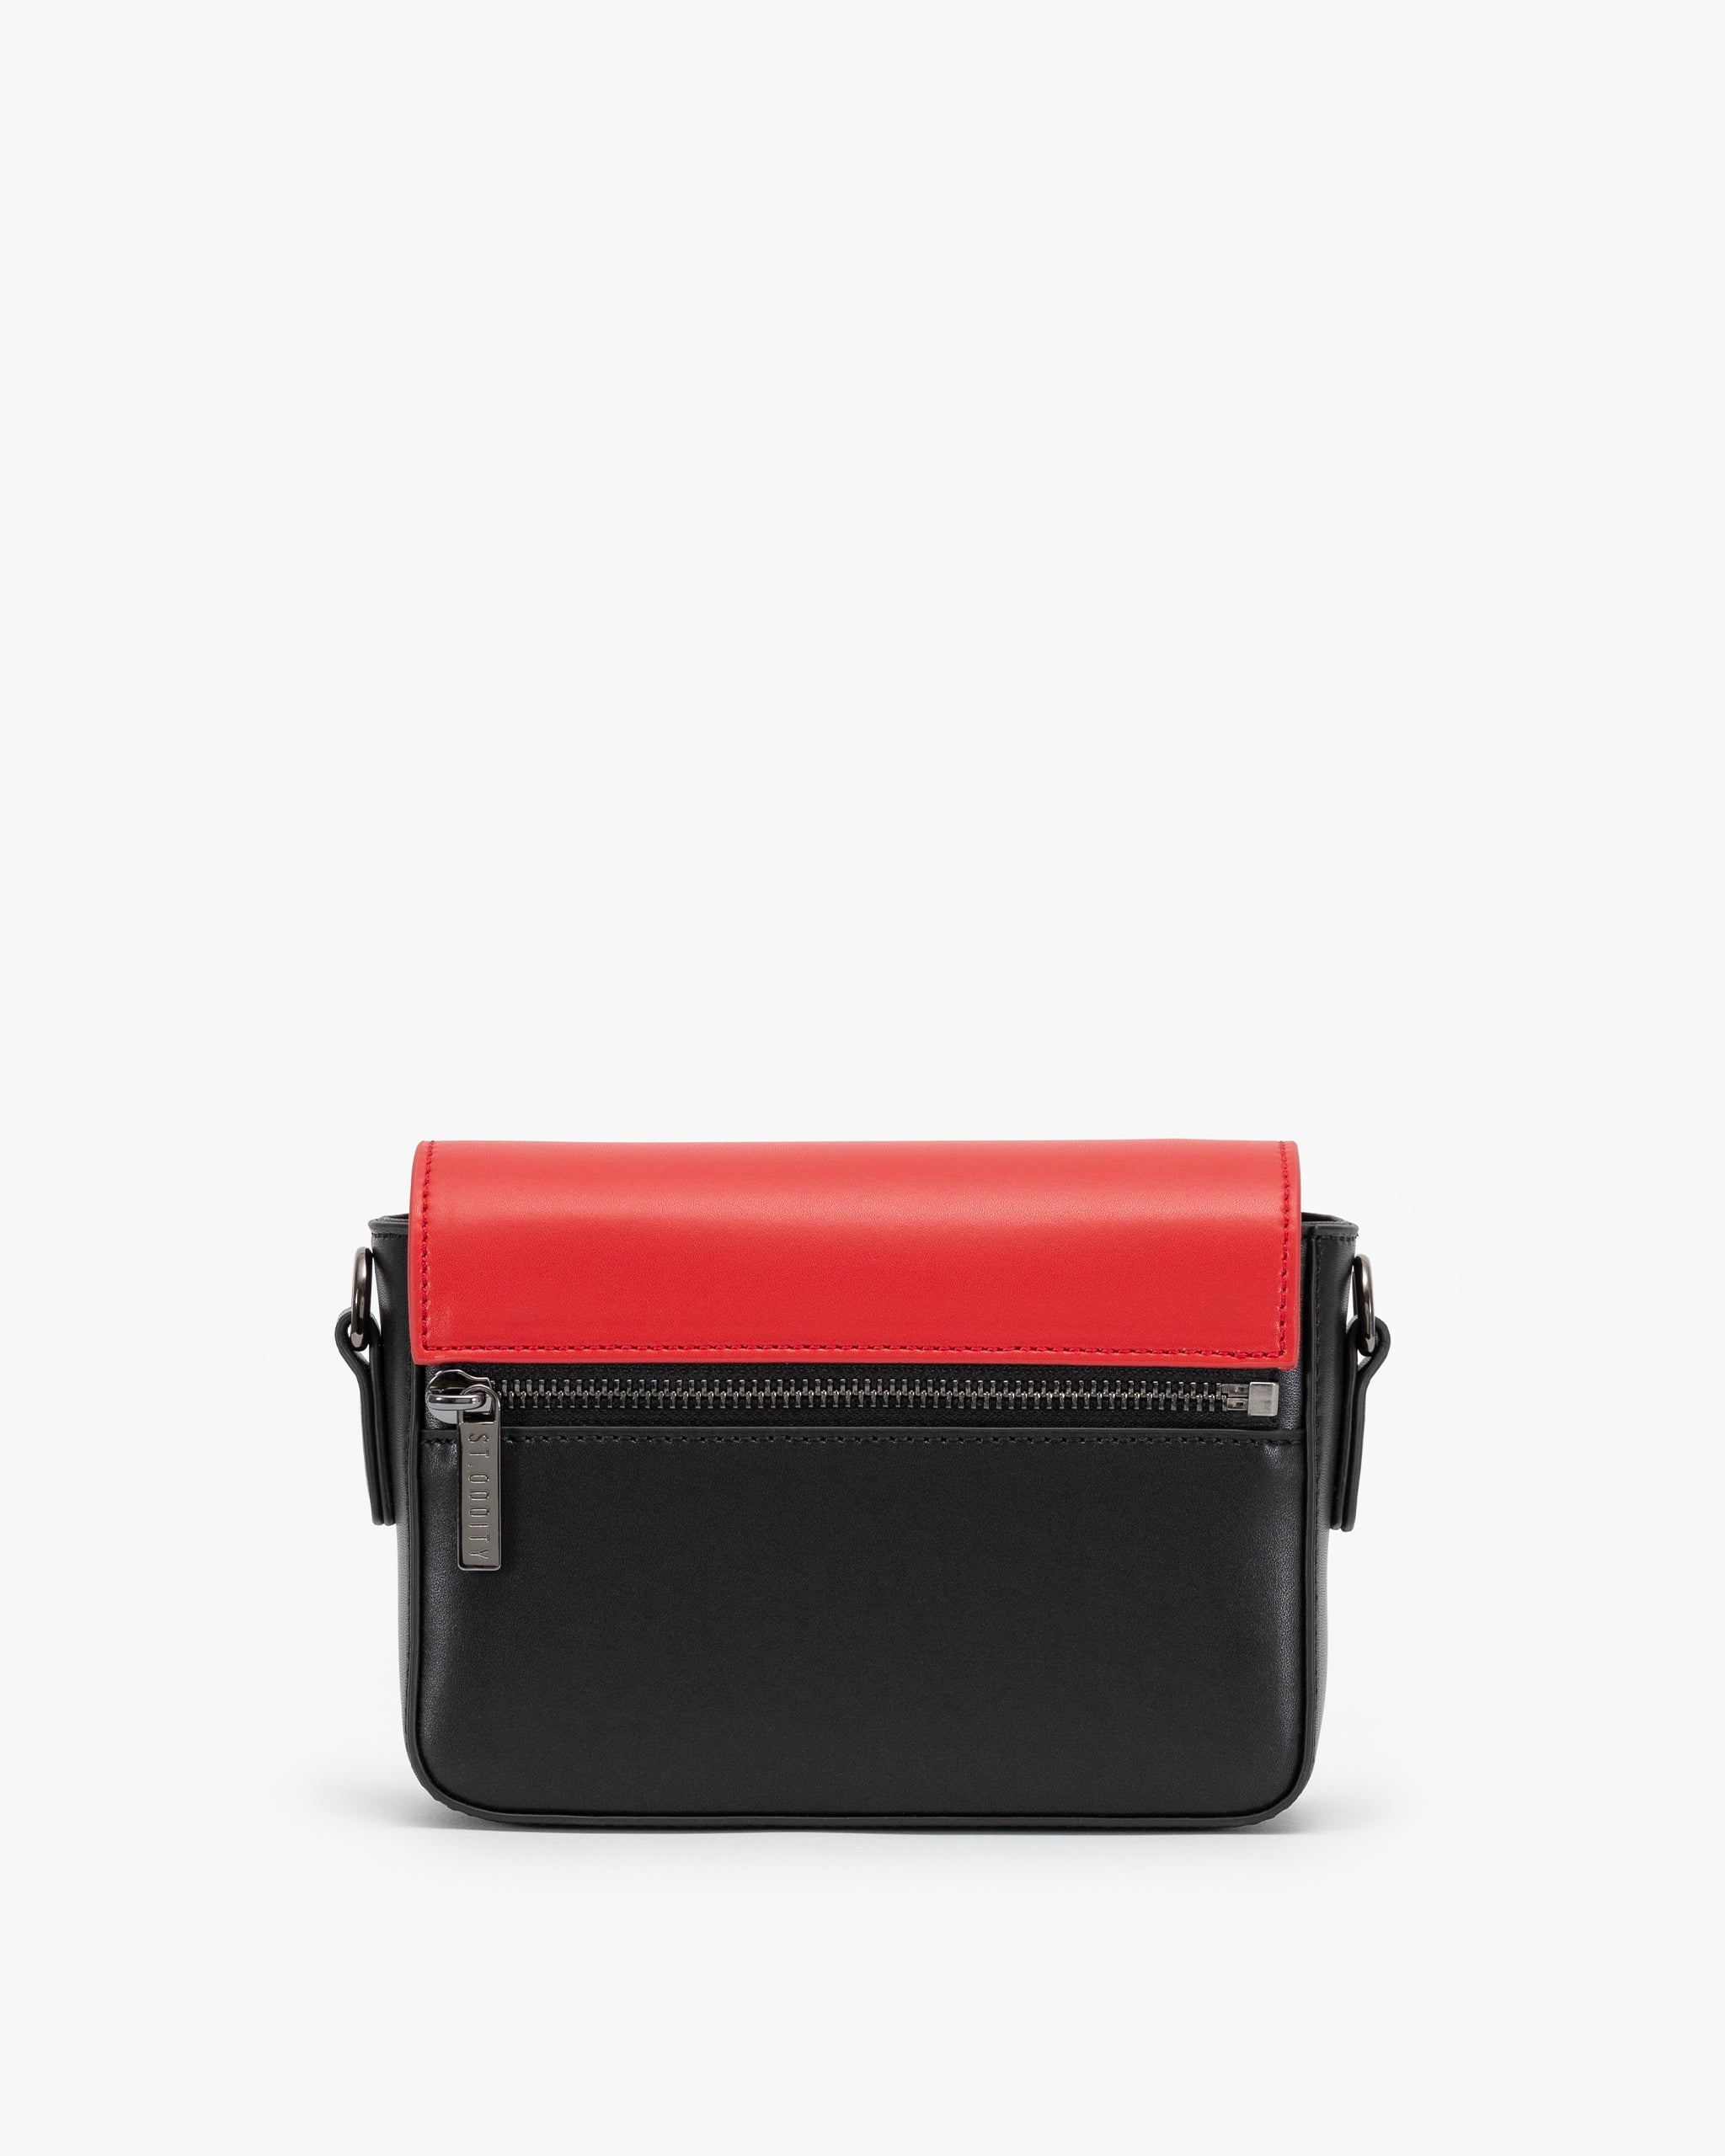 Crossbody Bag with Street Strap in Red/Black